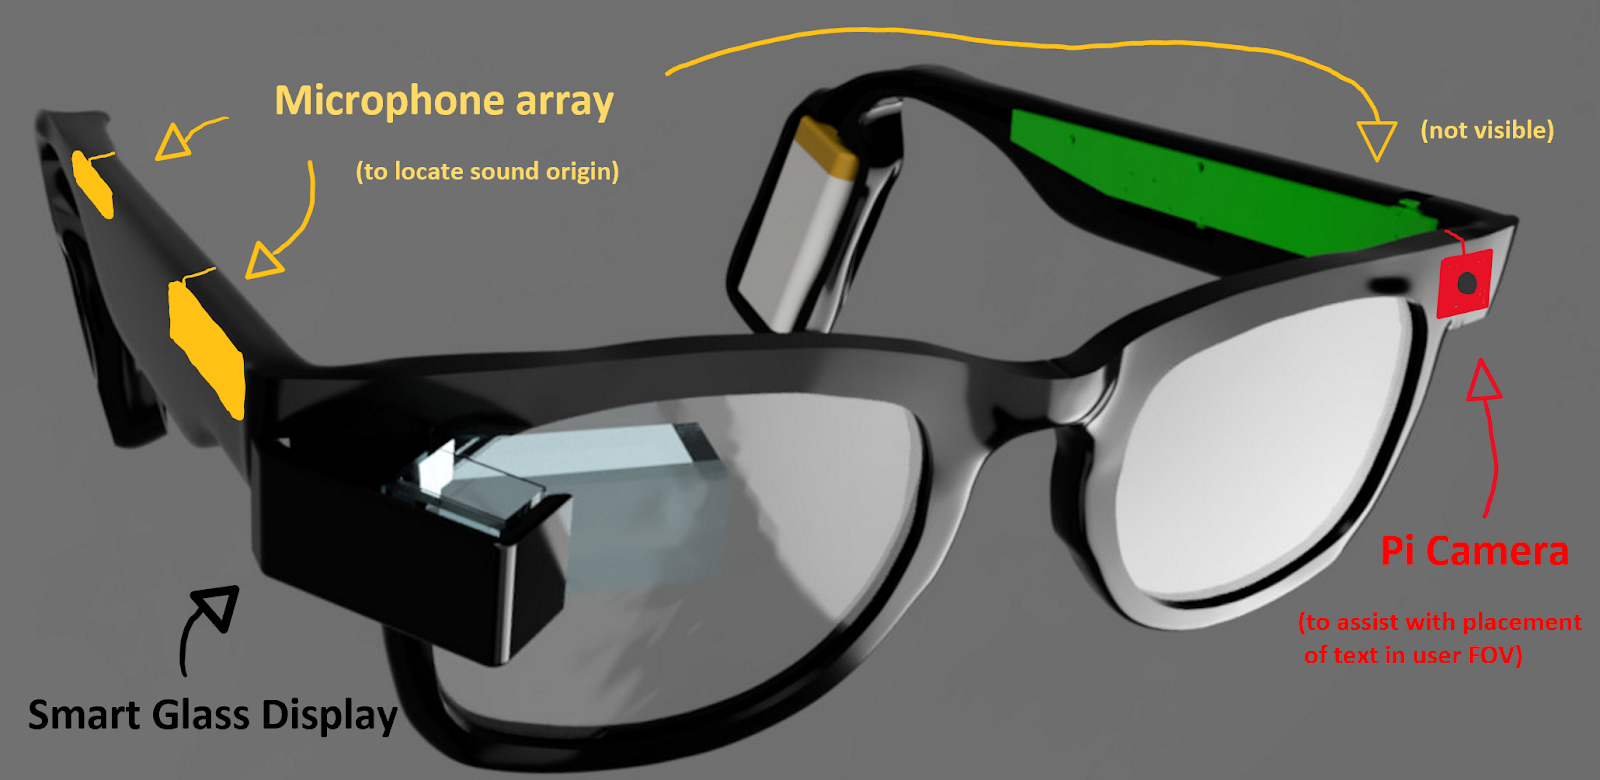 A pair of glasses with a device attached to them